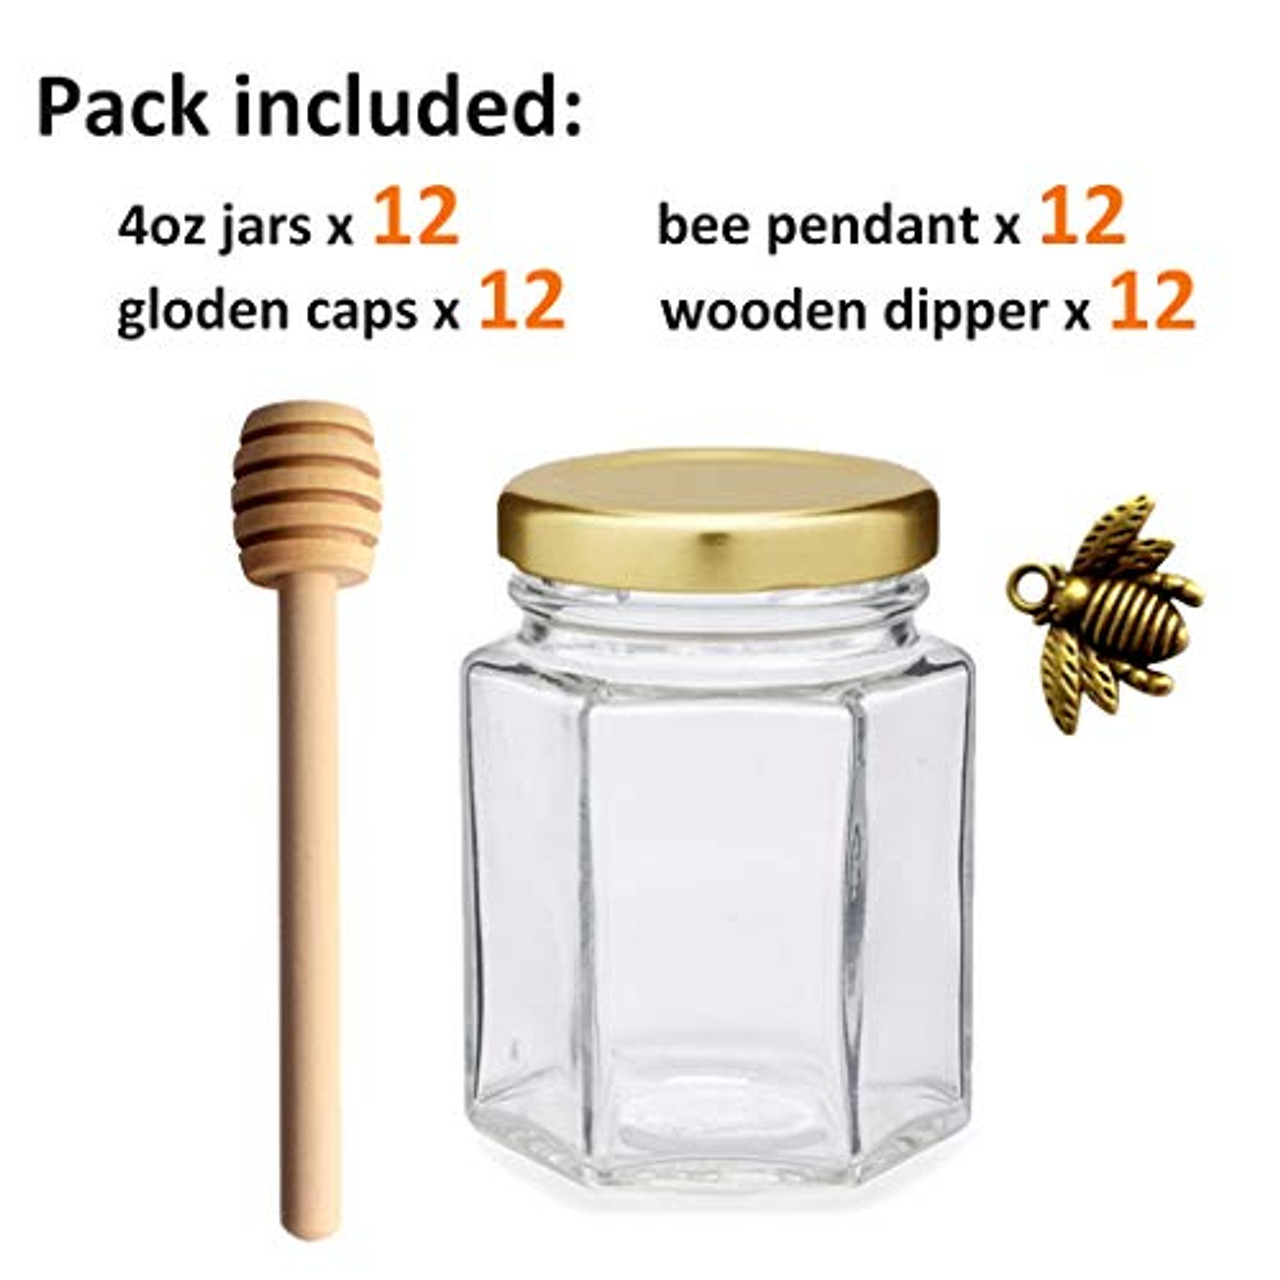 Hexagon 4 oz. Spice Jars with Hermetic Lids, 4-Pack